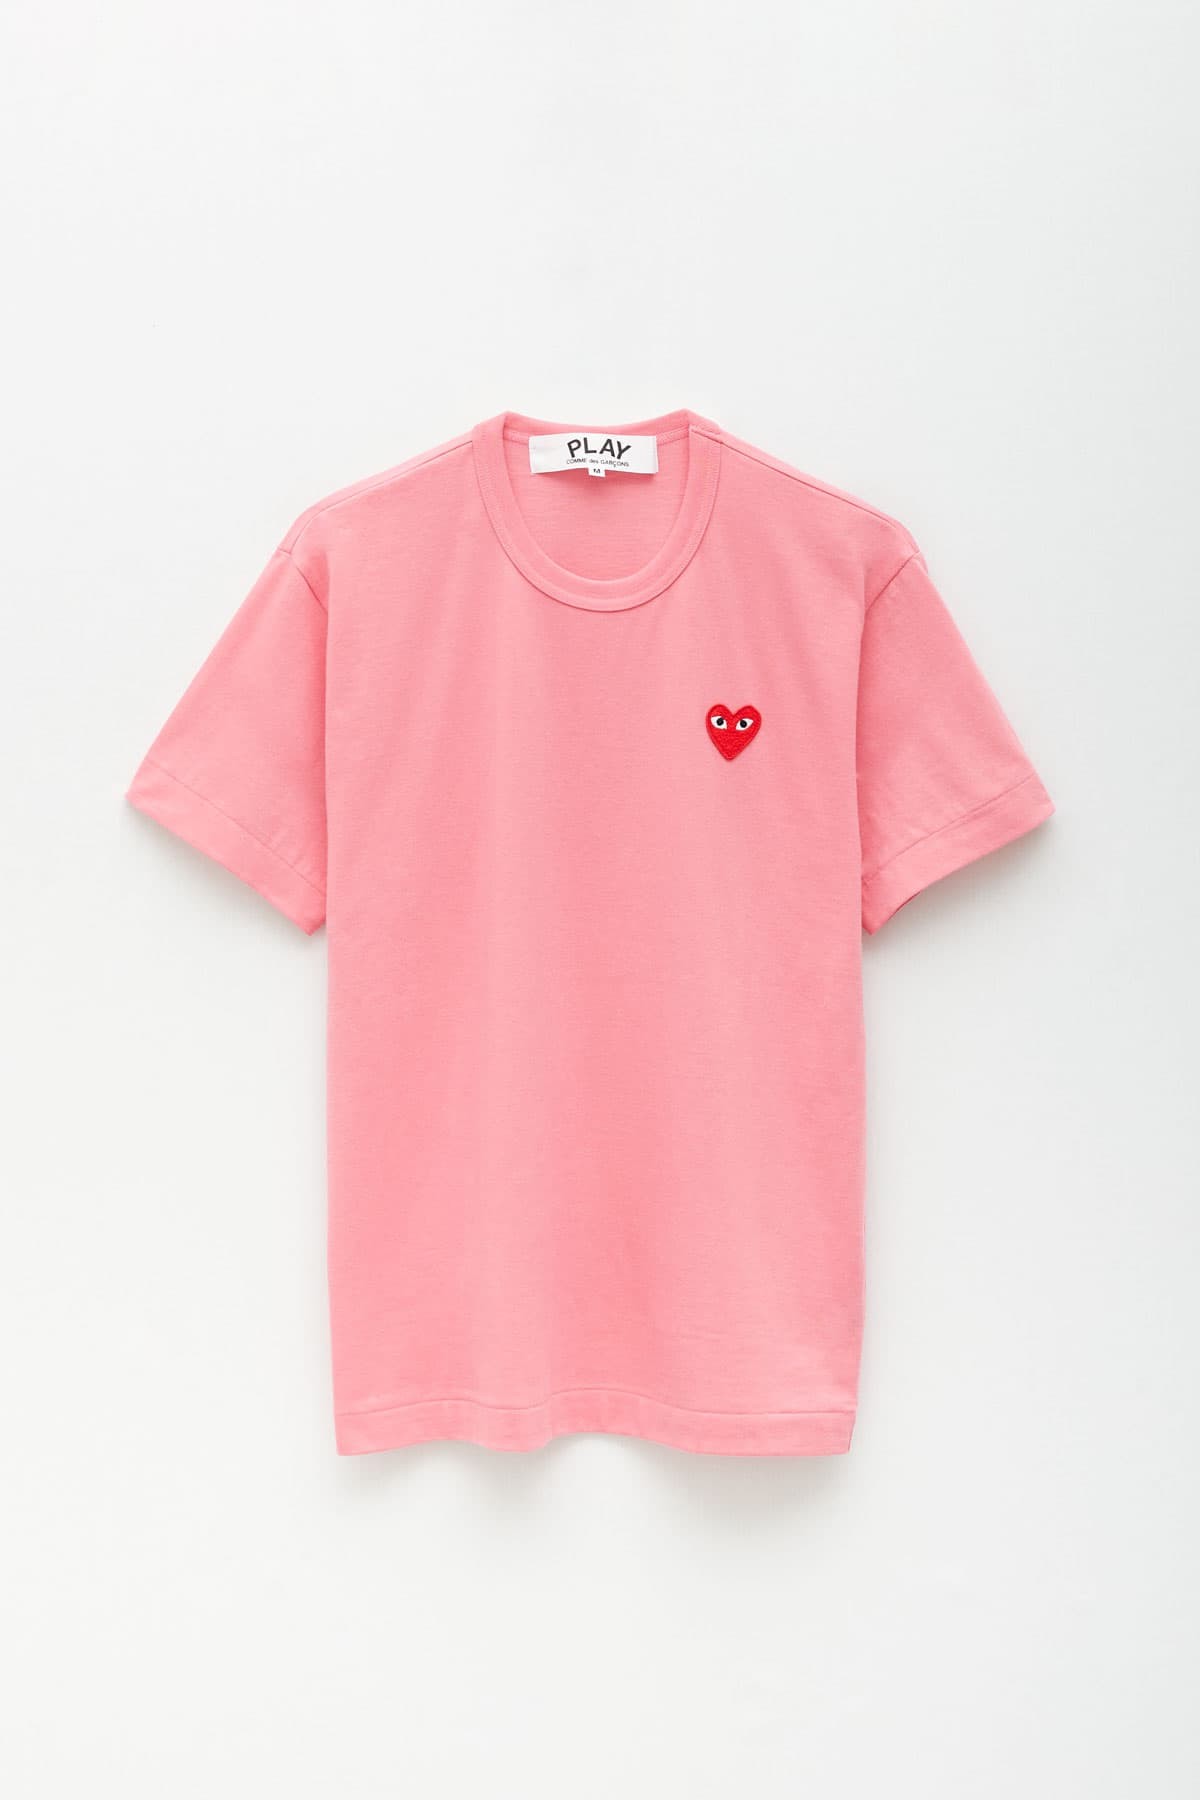 COMME DES GARCONS PLAY PINK T-SHIRT IAMNUE